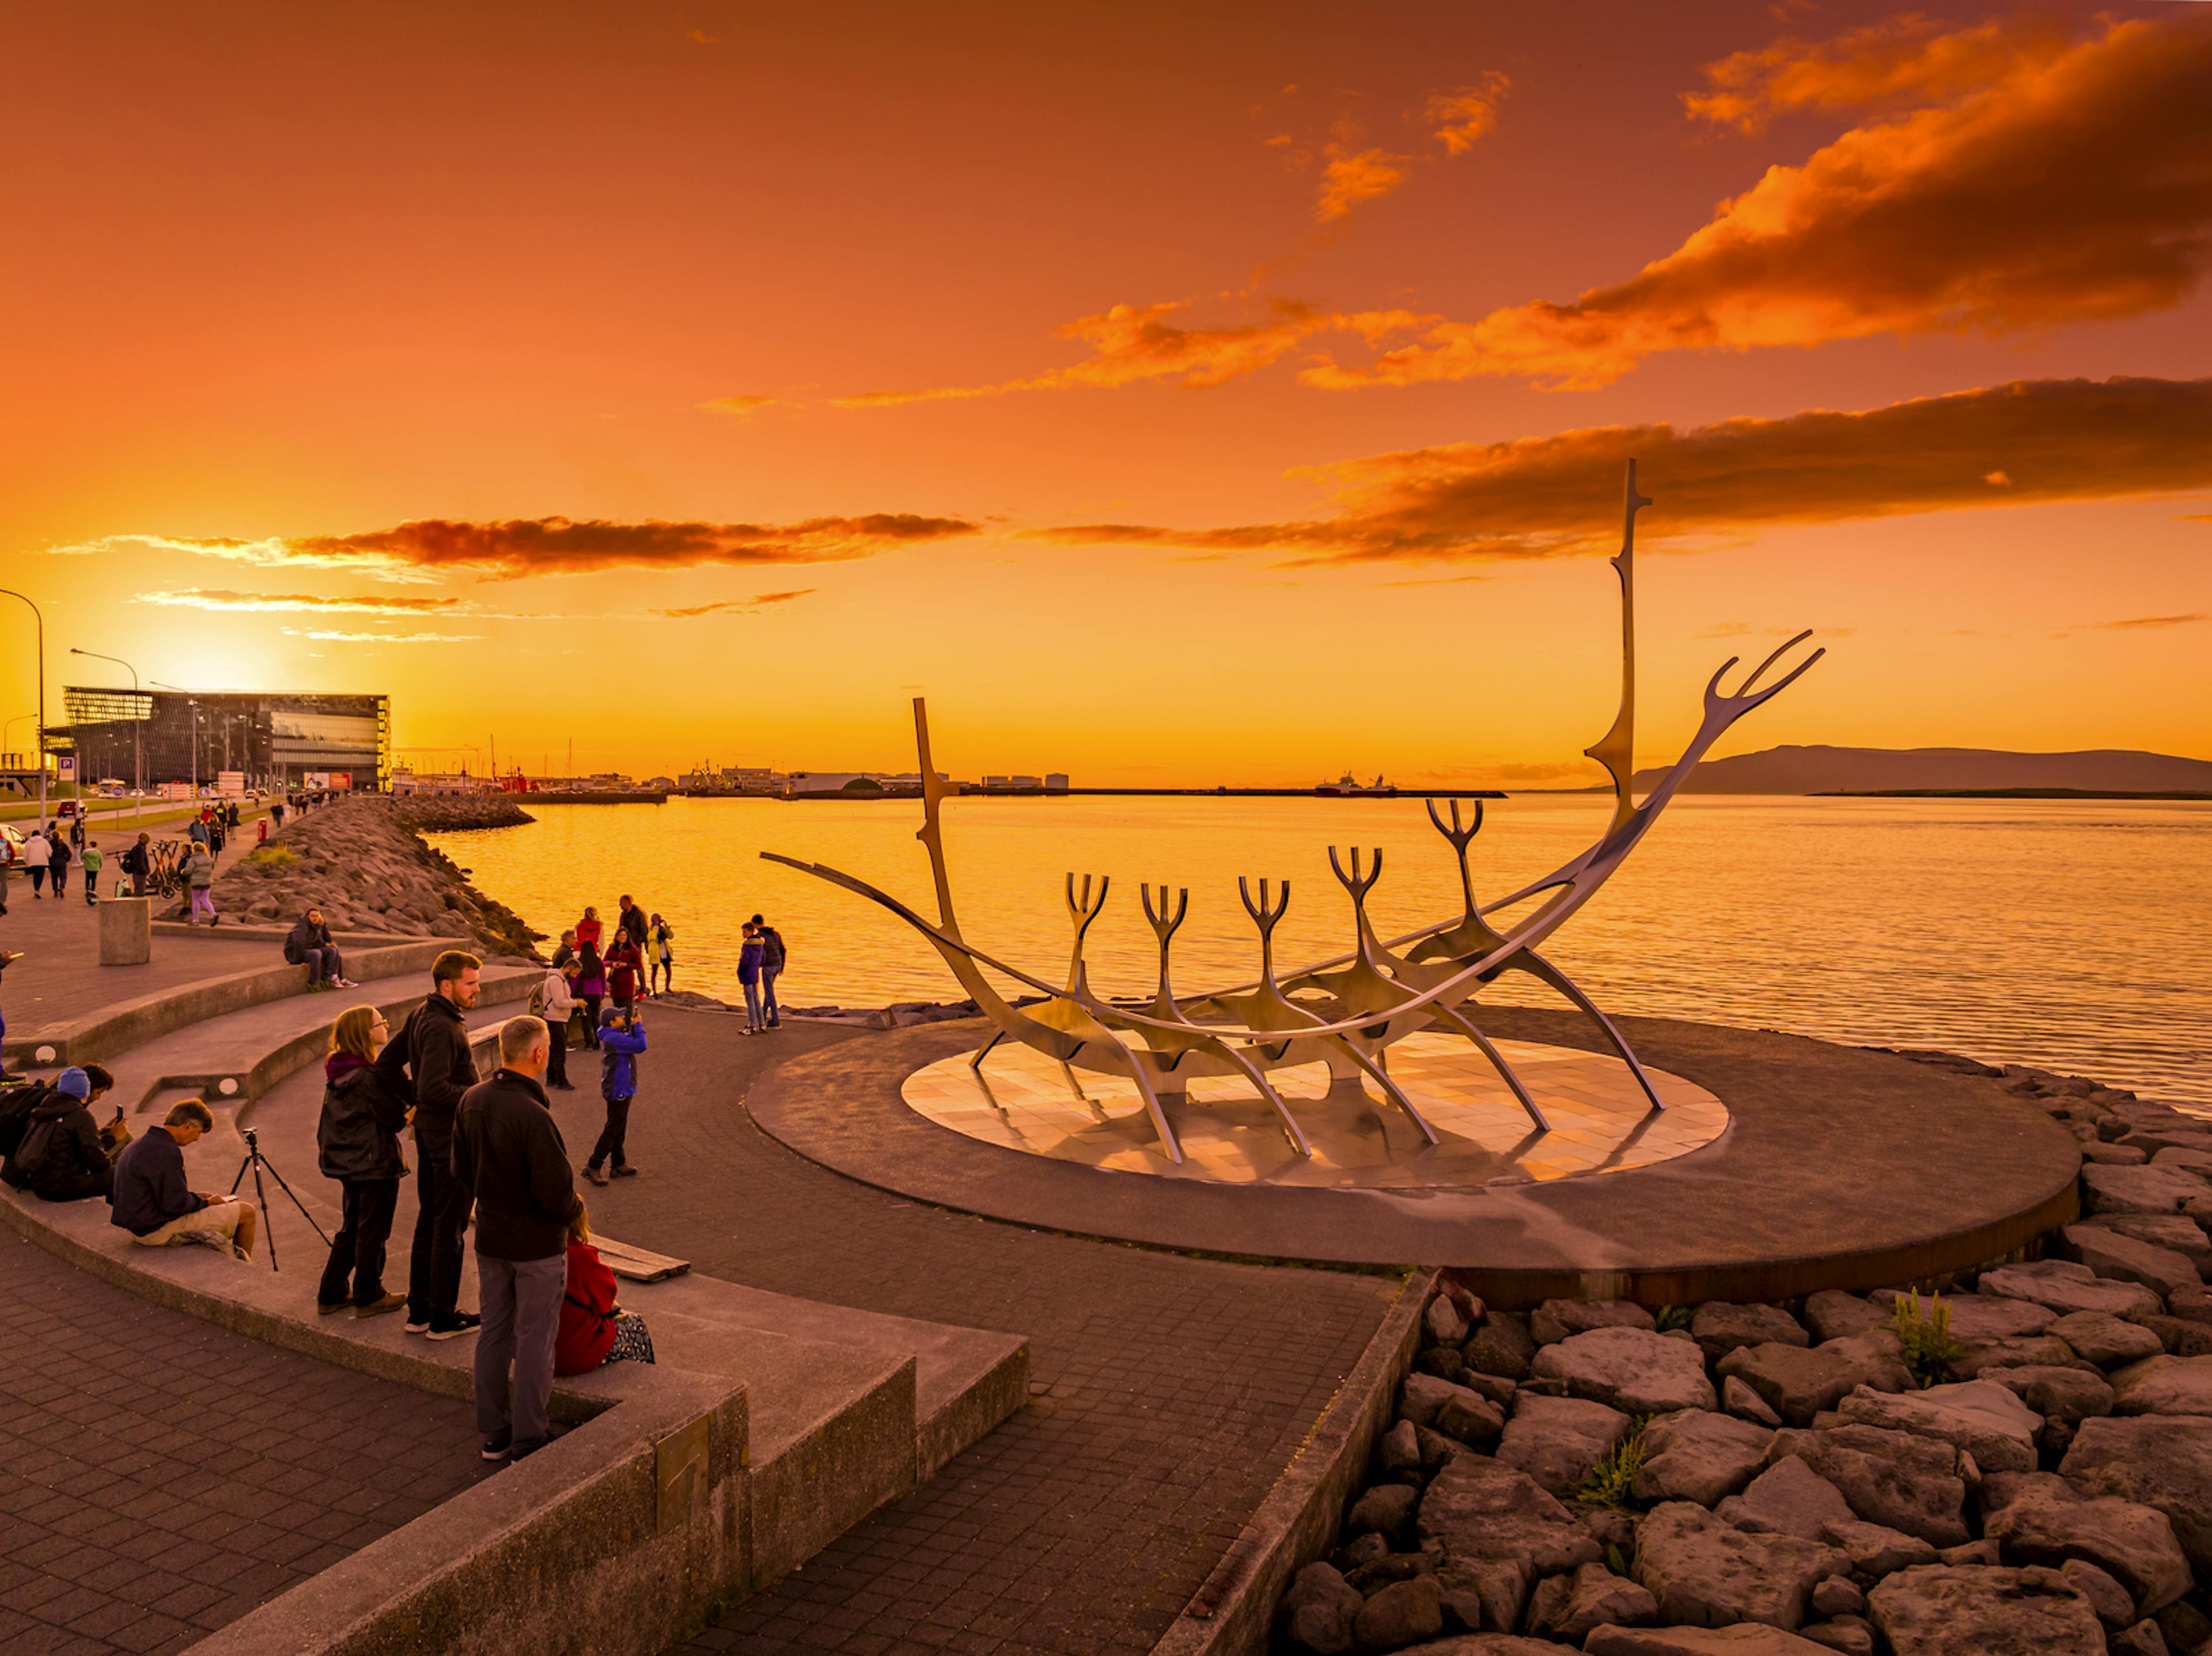 The Sun Voyager at sunset